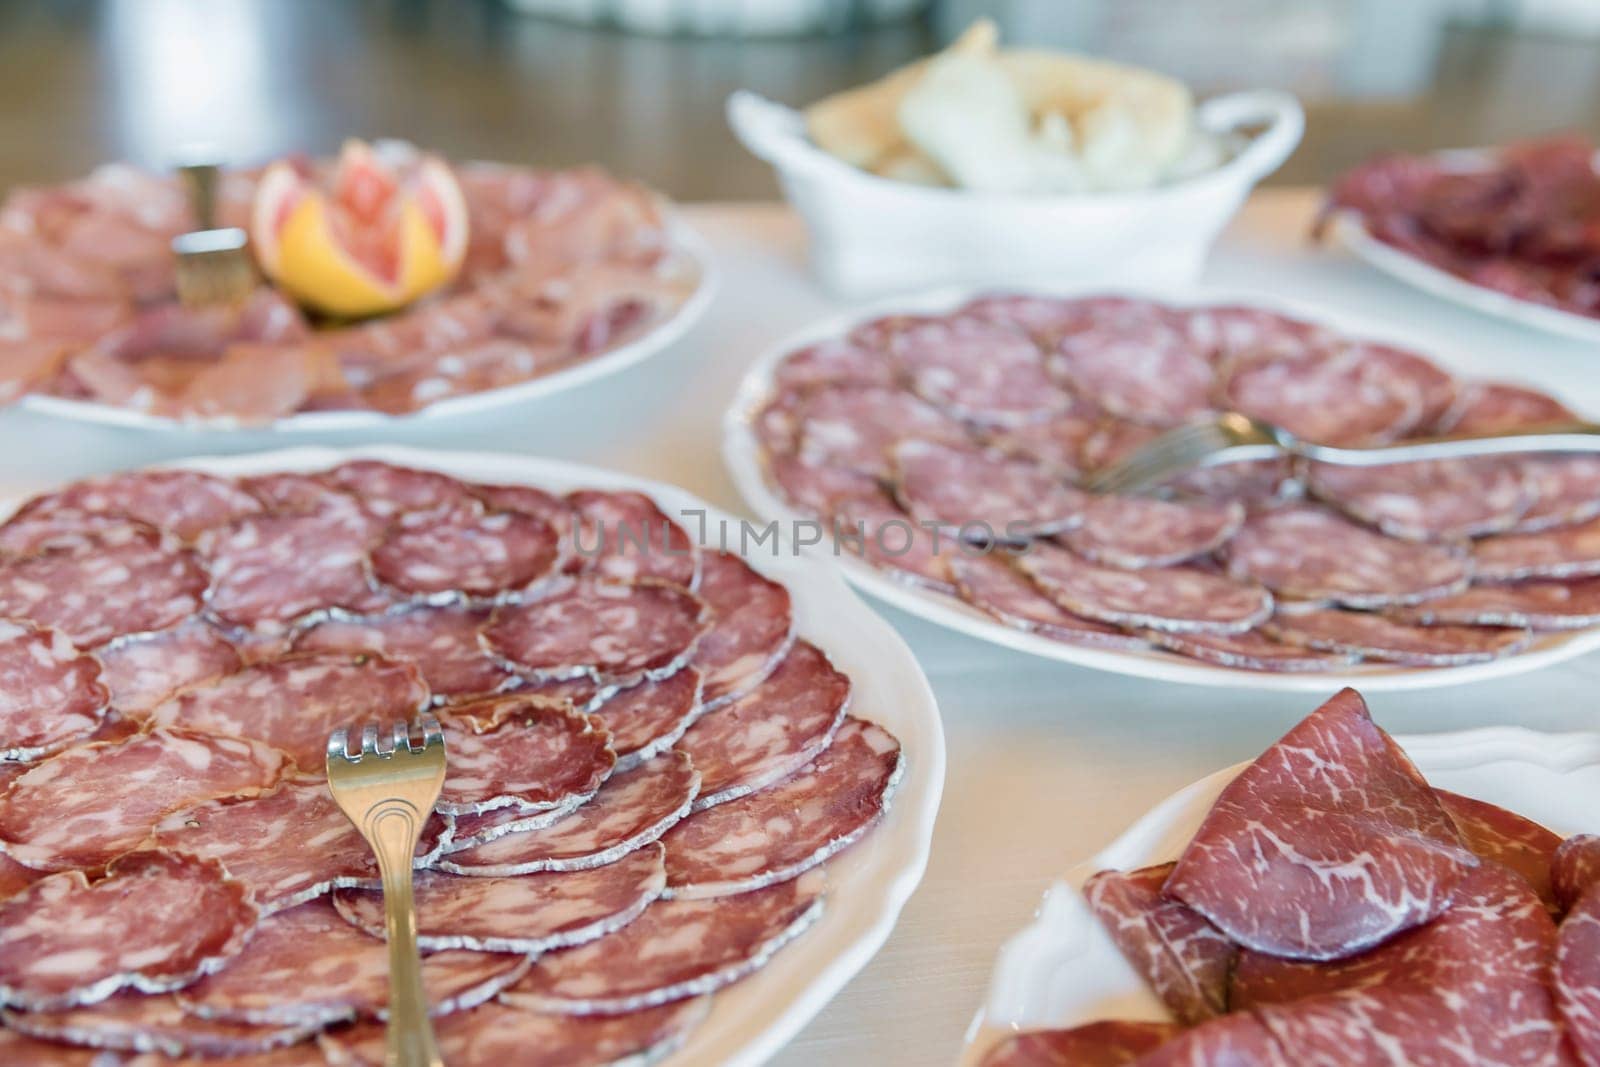 Cured meat in plates, ready for served to an event or party. Appetizer.